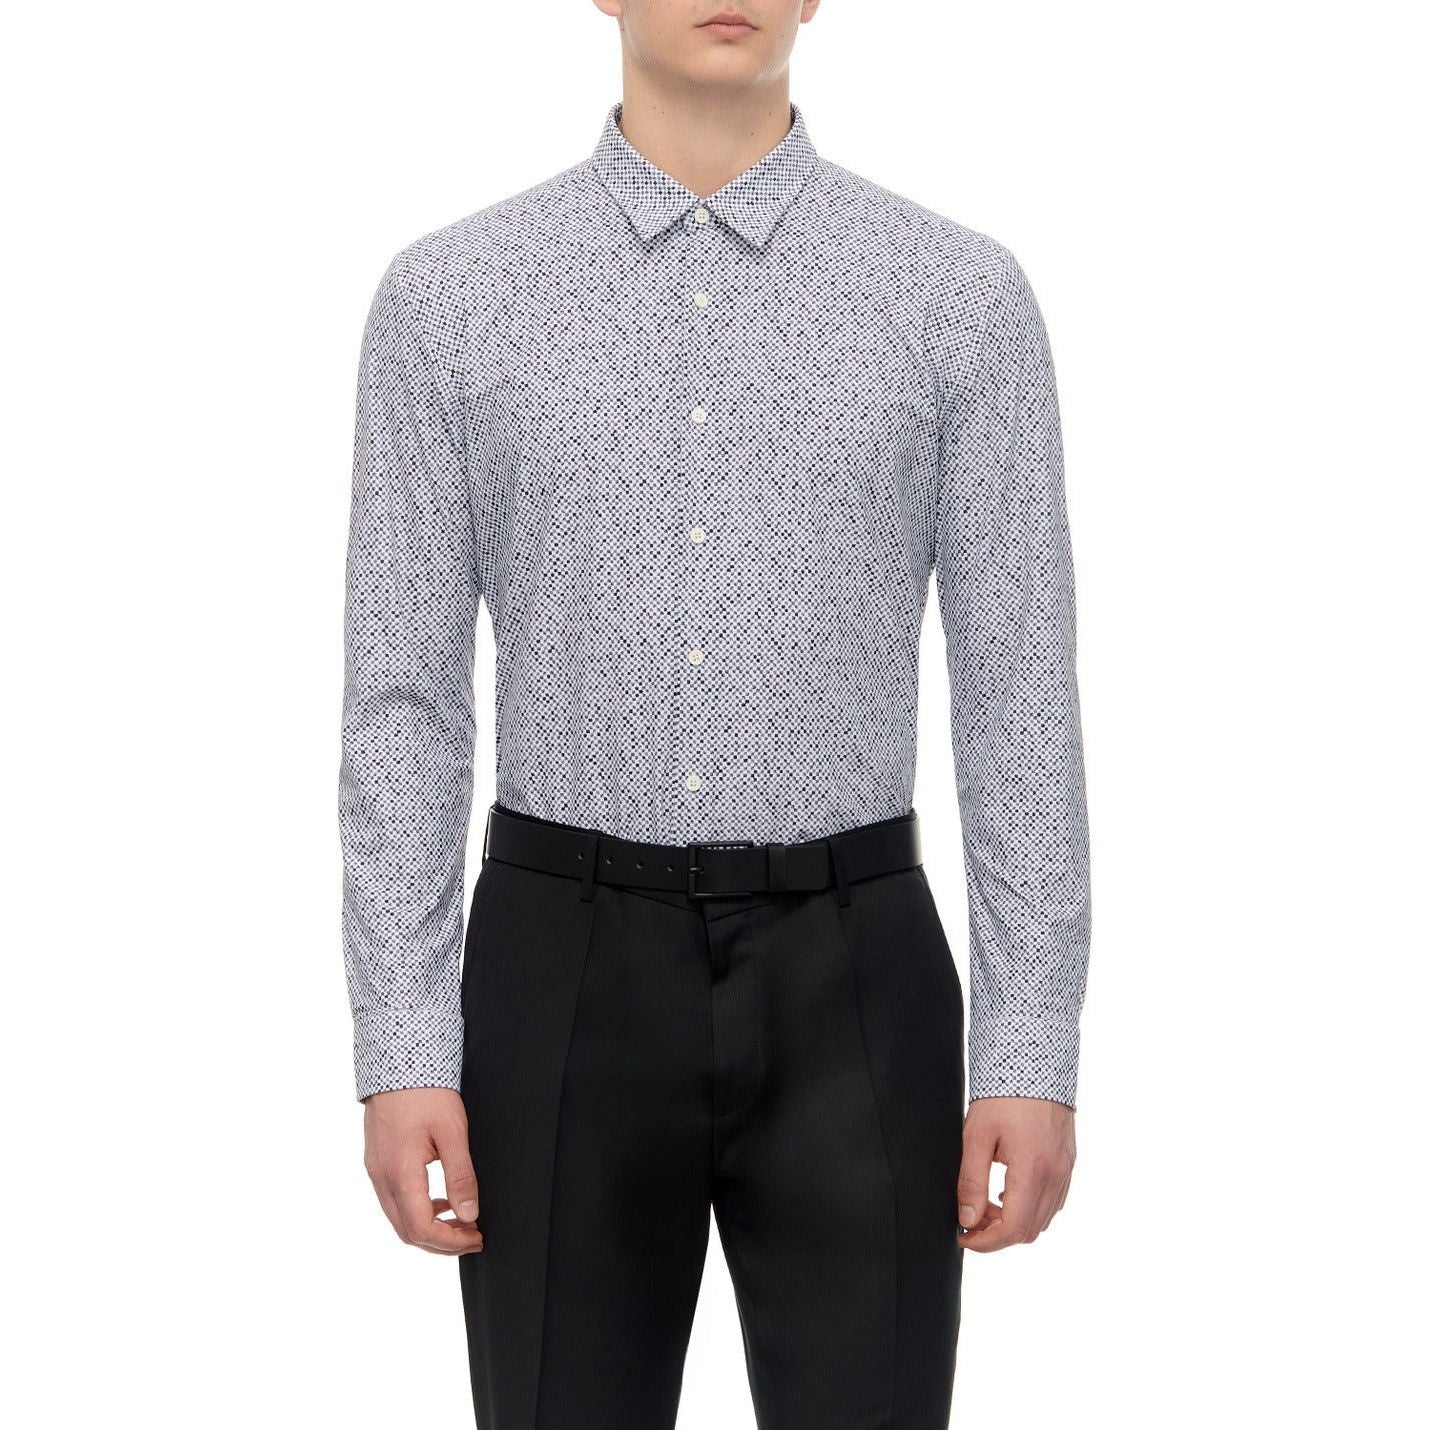 BOSS SLIM-FIT SHIRT IN HIGH-PERFORMANCE STRETCH FABRIC WITH PRINT - Yooto